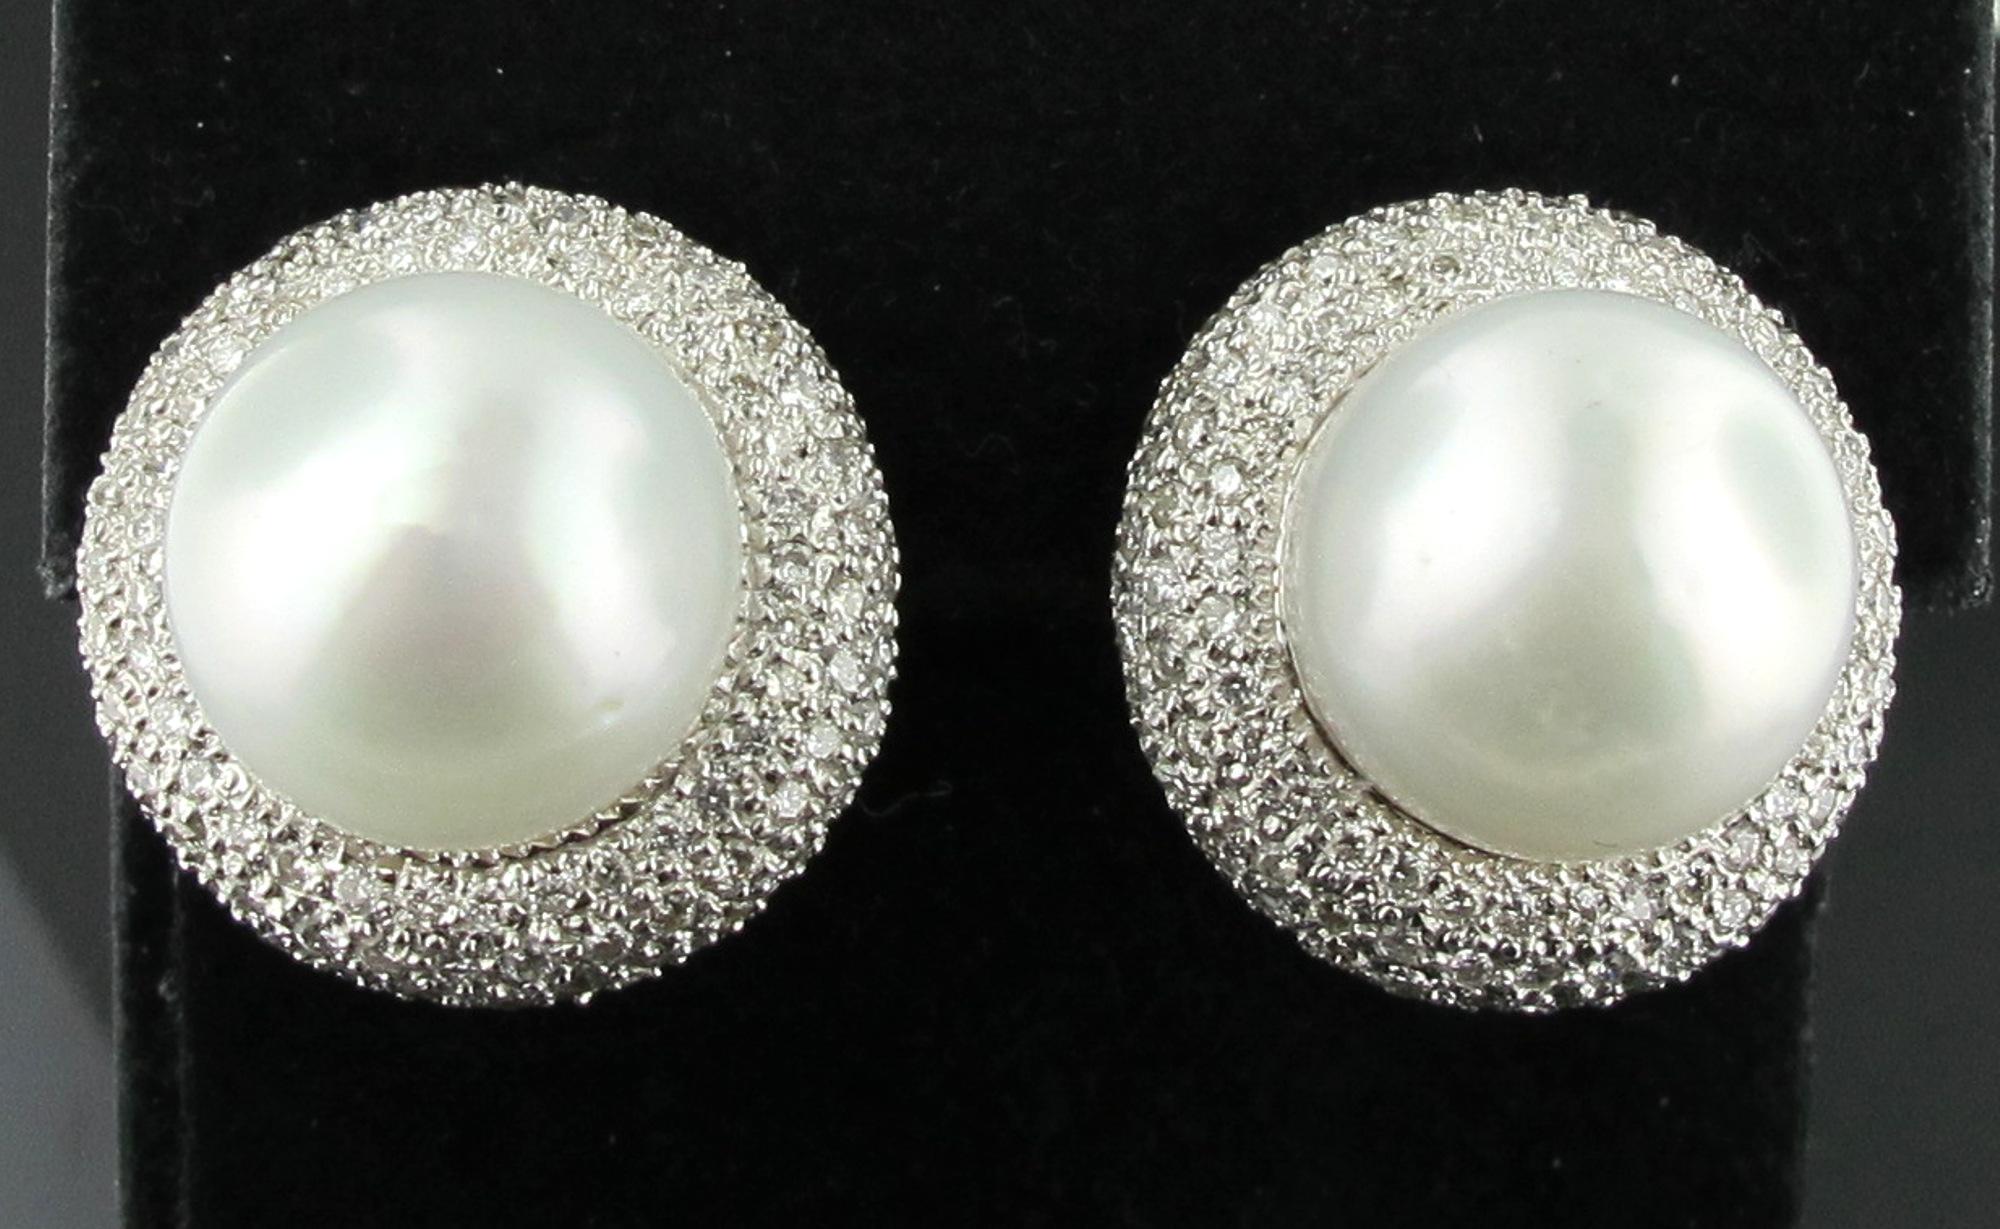 Set in 14 karat white gold are two south sea 13.6 millimeter pearls surrounded by approximately 2 carats of pave diamonds on each earring for a total diamond weight of approximately 4.00 carats. The pearls have a high lustre. 